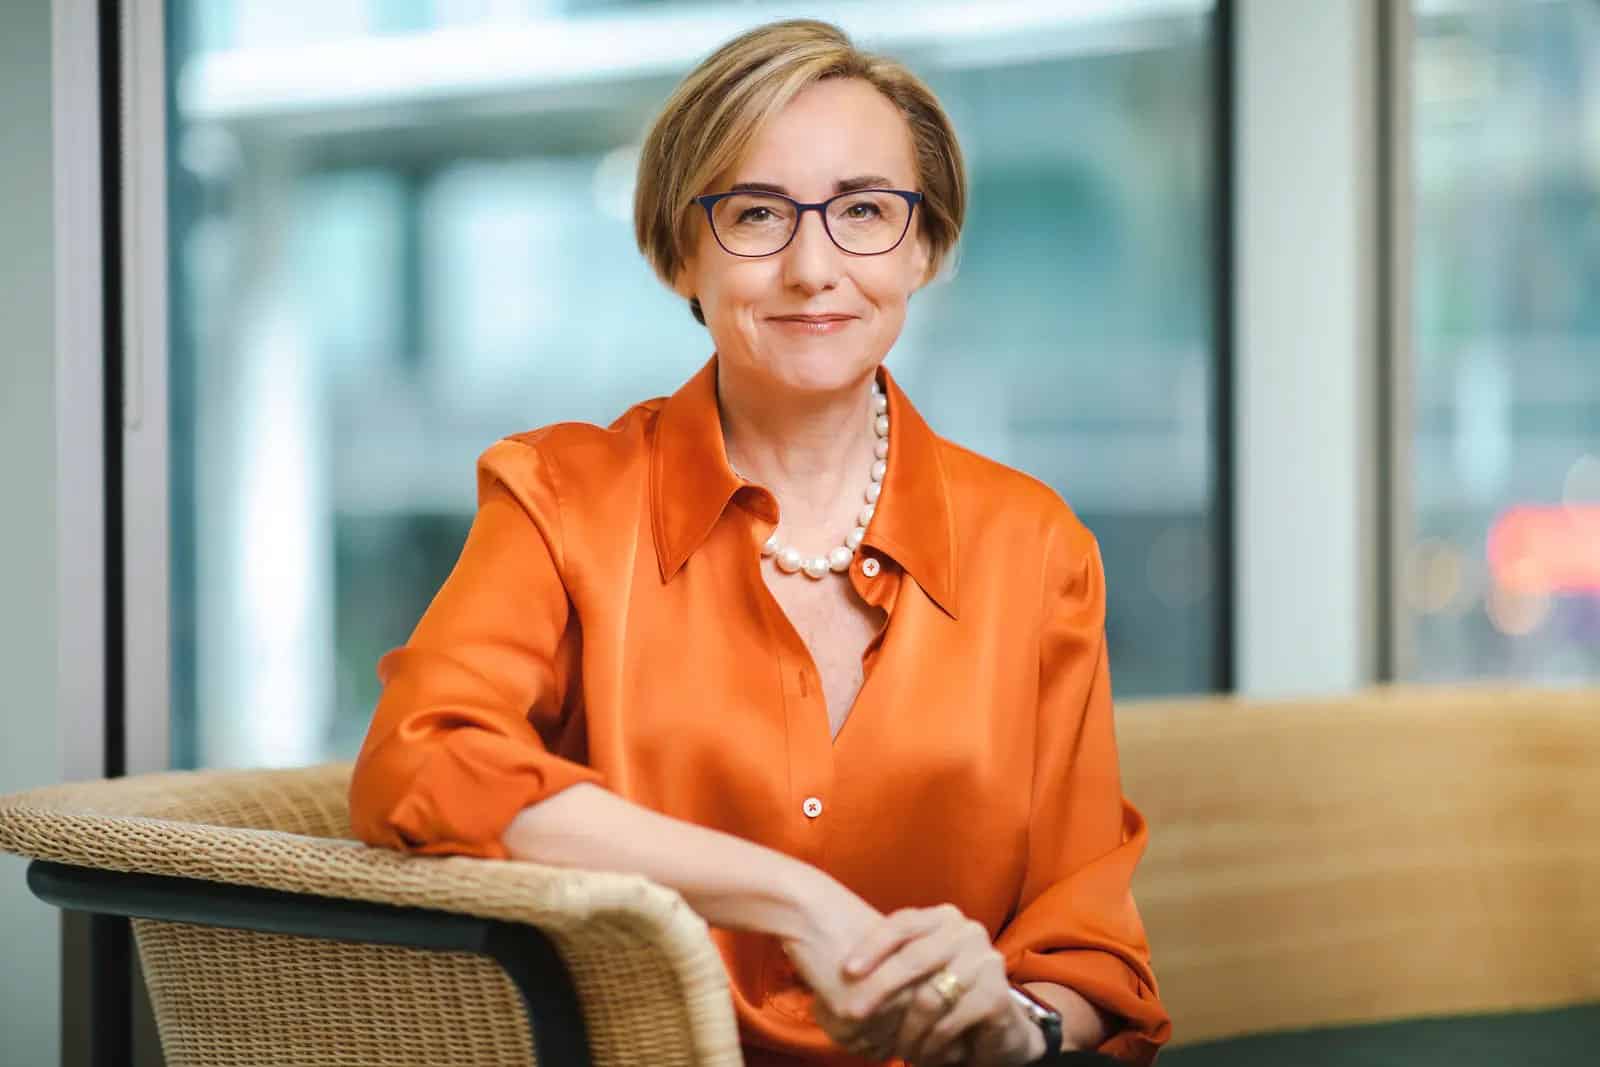 Margherita Della Valle, Chief Executive Officer of Vodafone Group